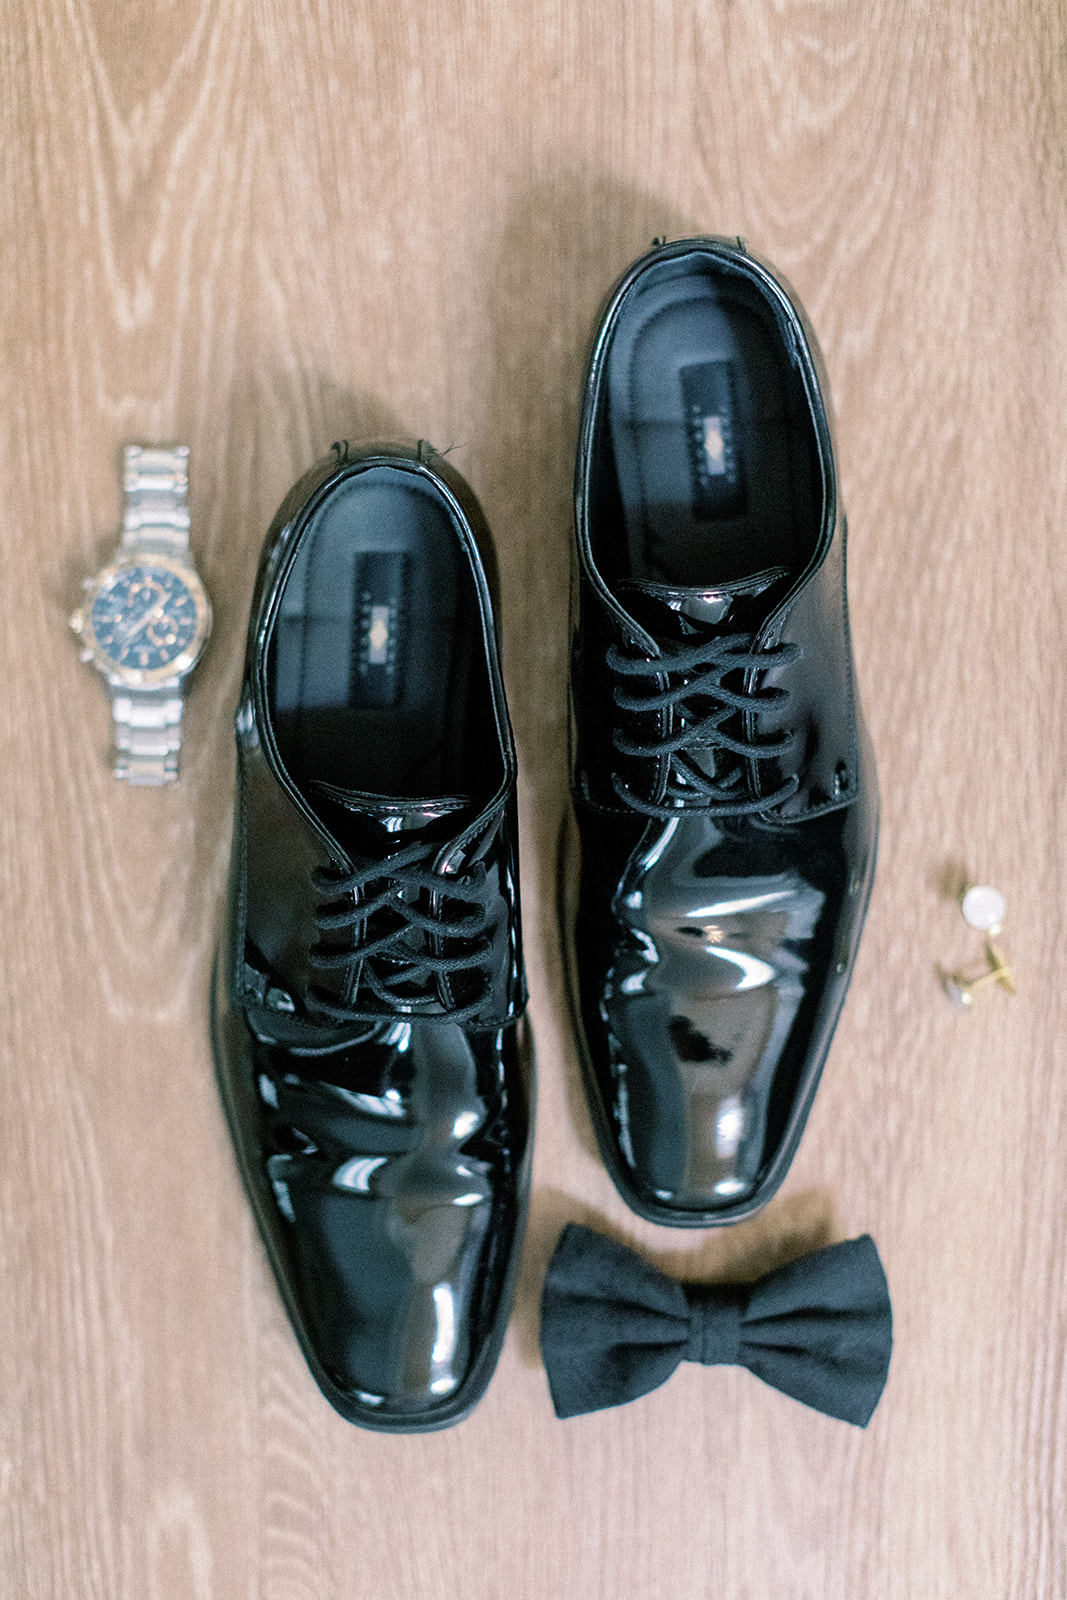 Pennsylvania wedding photographer captures groom's details with shoes, bowtie and watch